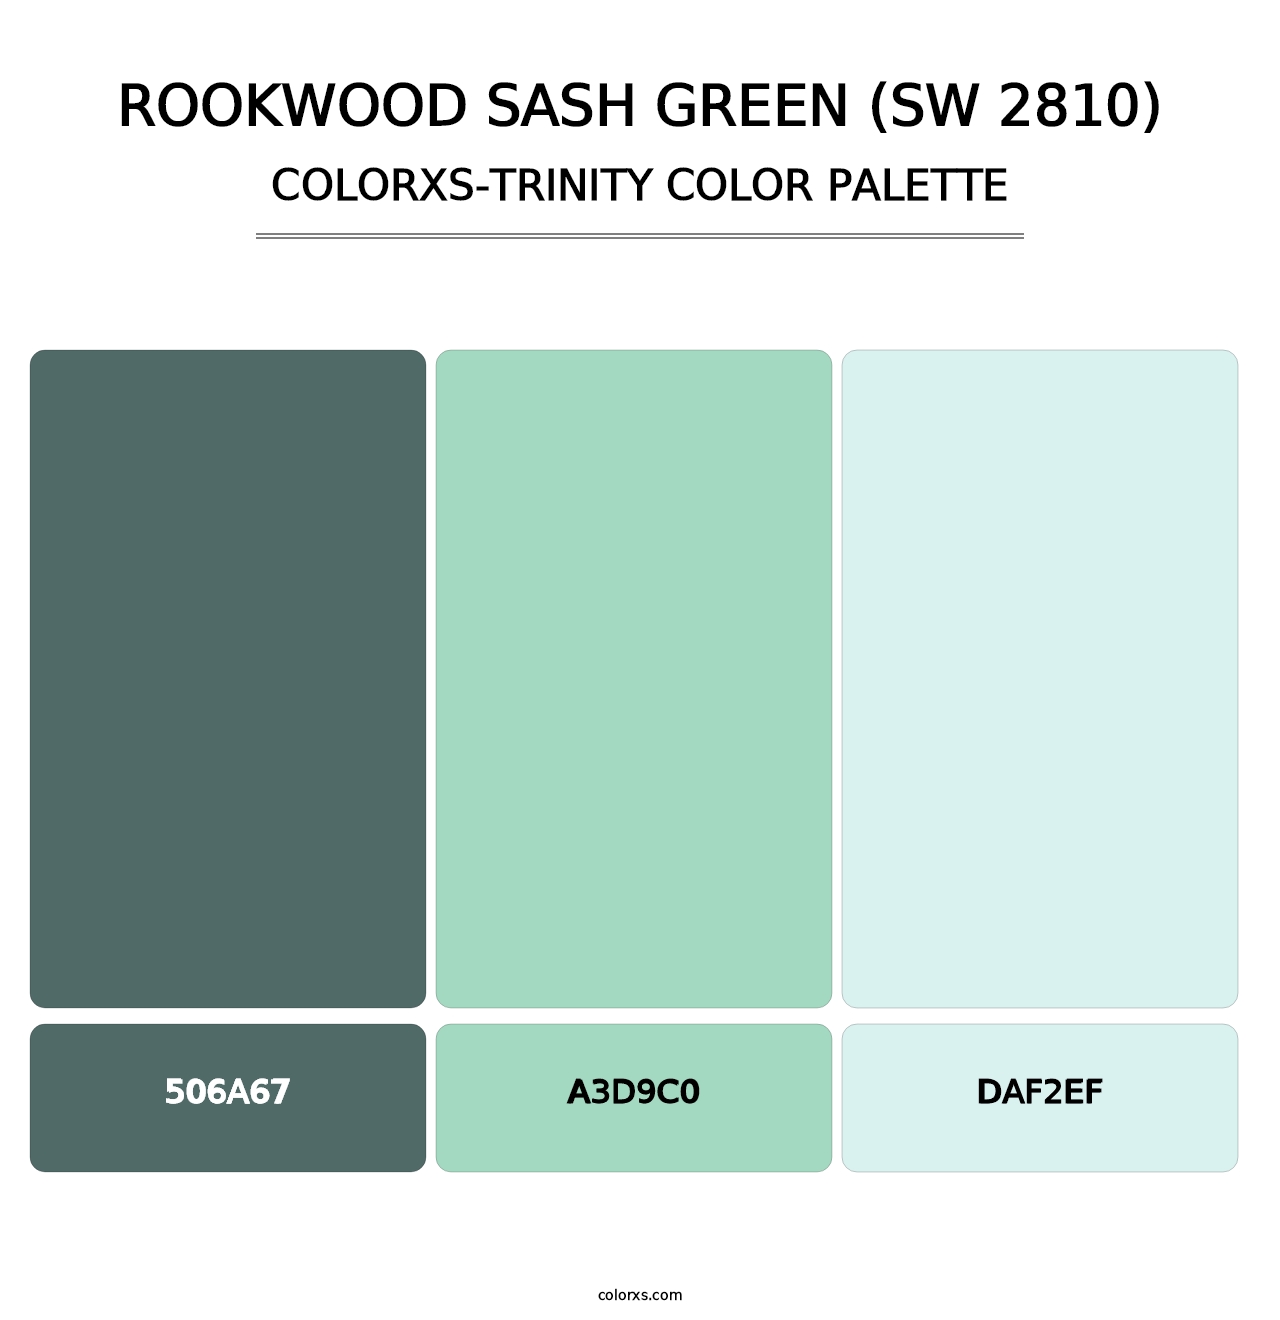 Rookwood Sash Green (SW 2810) - Colorxs Trinity Palette